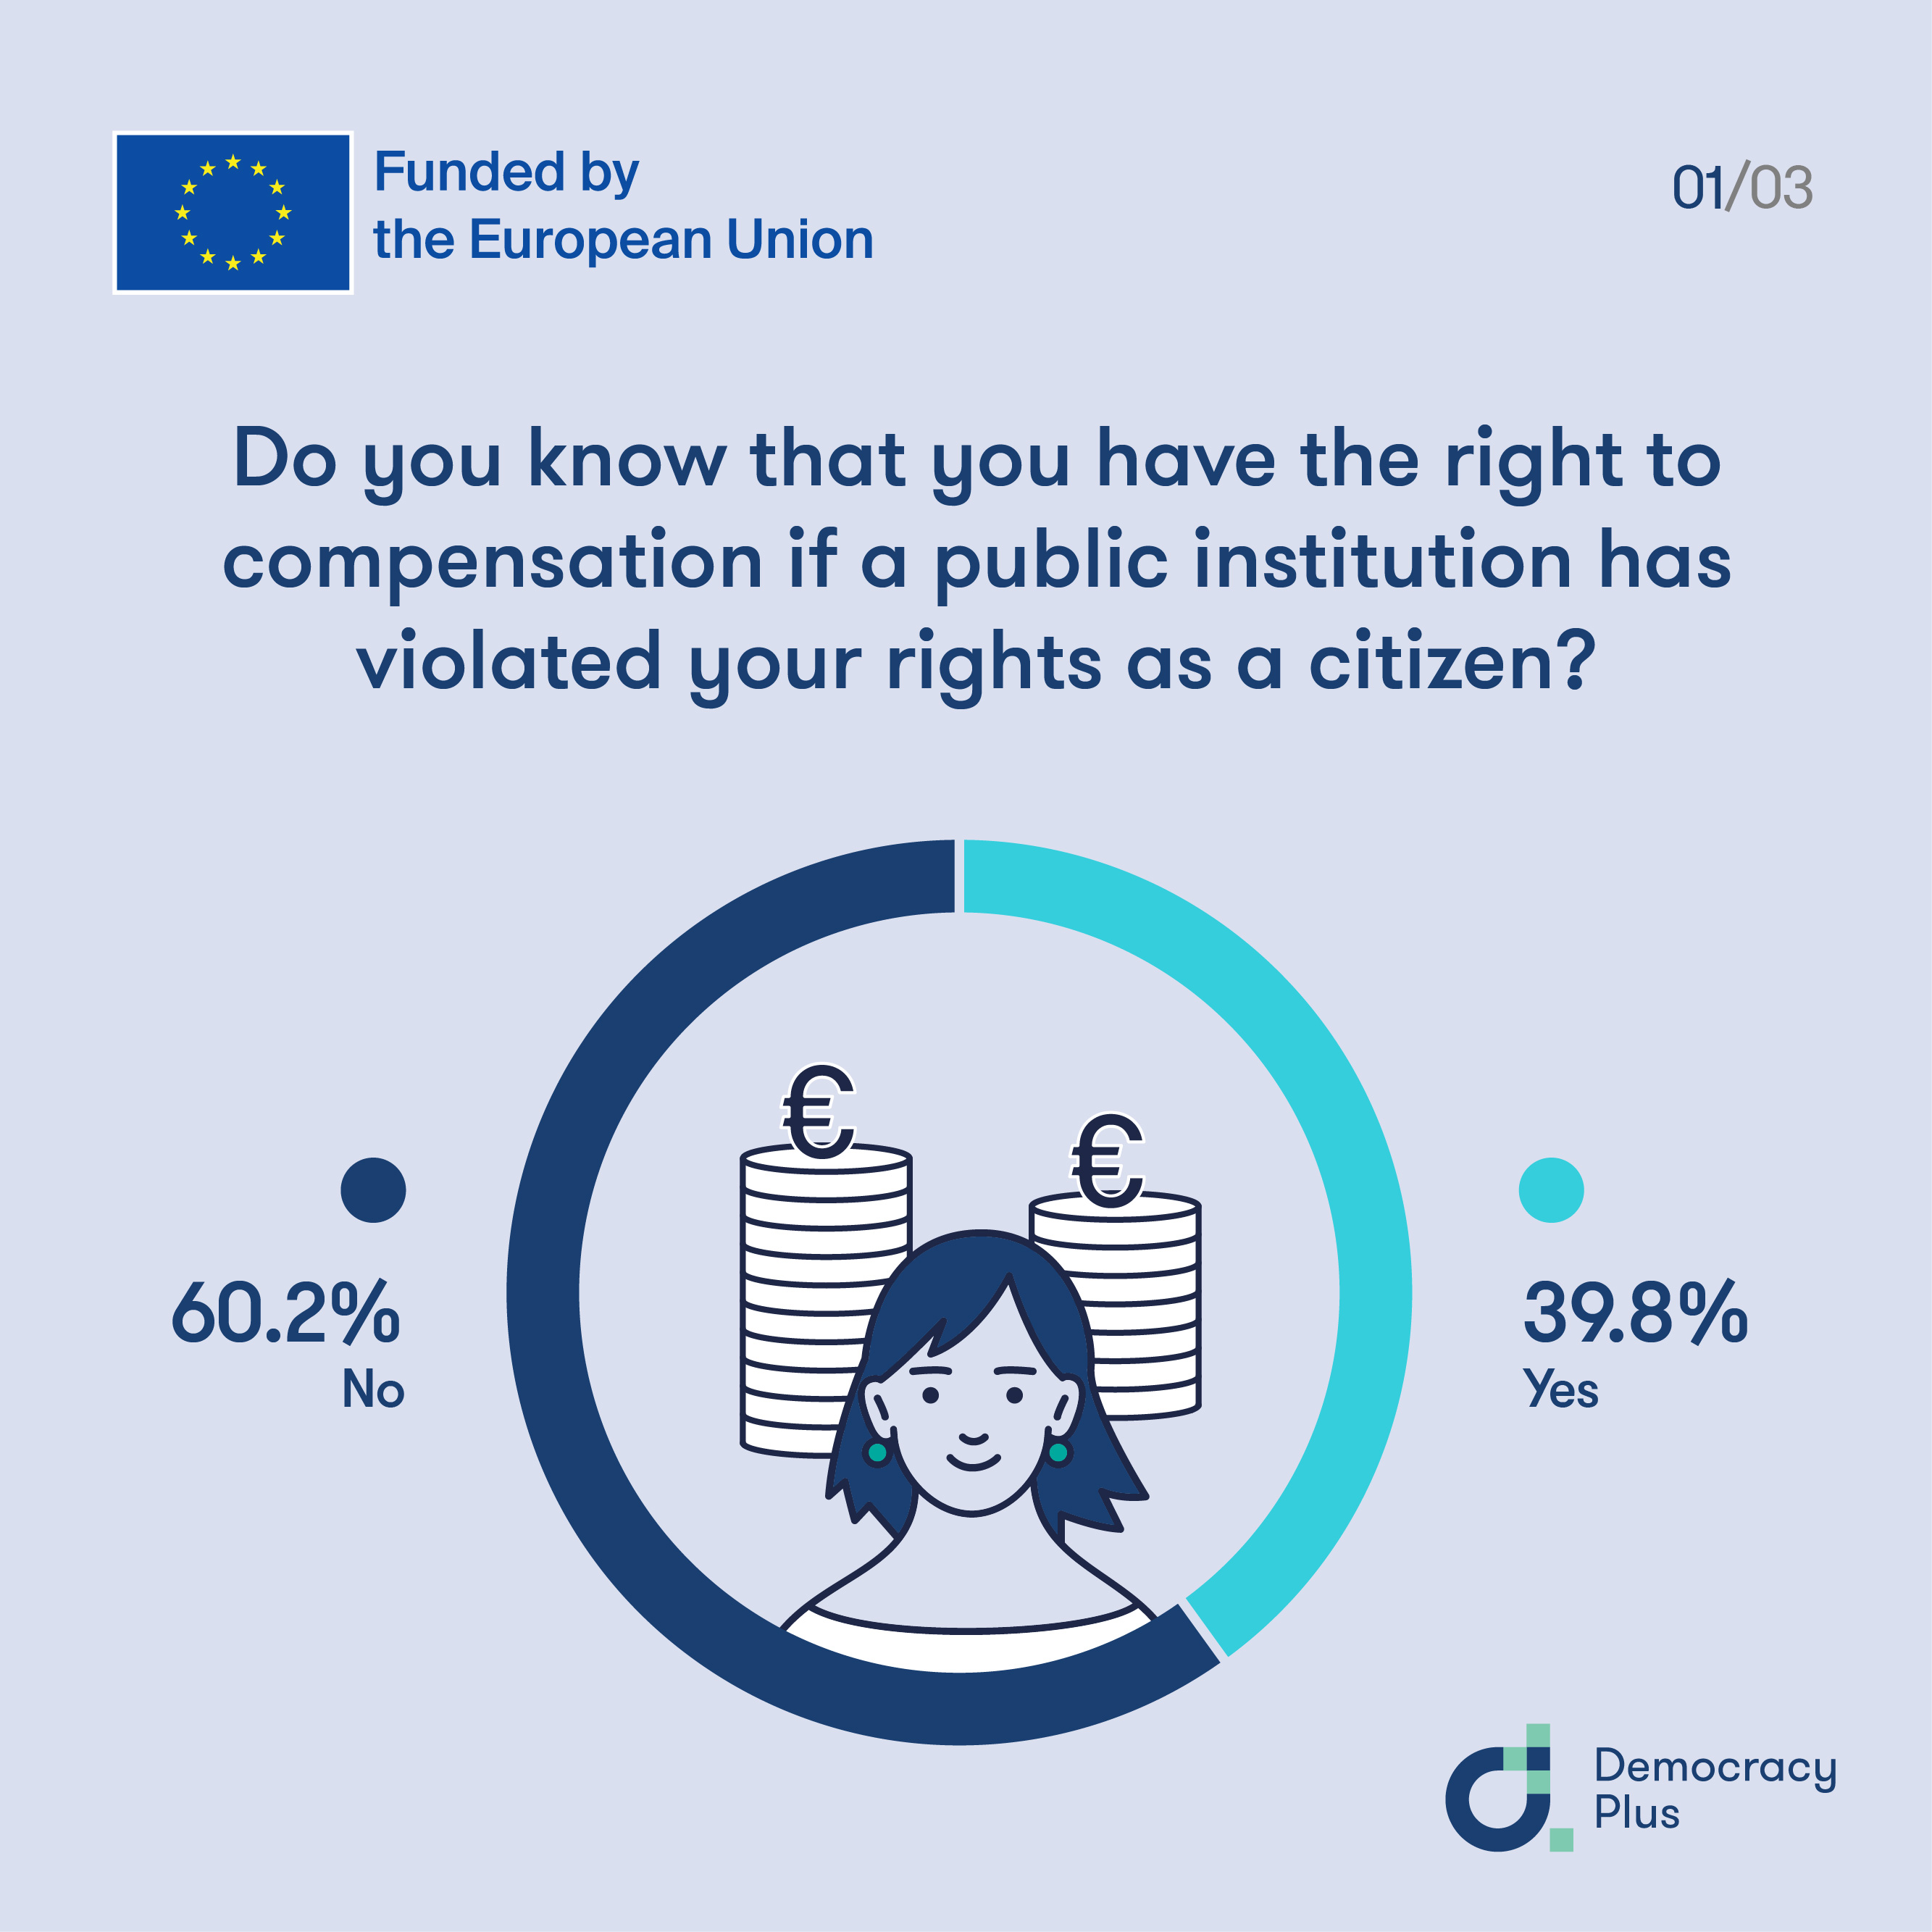 Survey with citizens 1/3: Do you know that you have the right to compensation if a public institution has violated your rights as citizen?